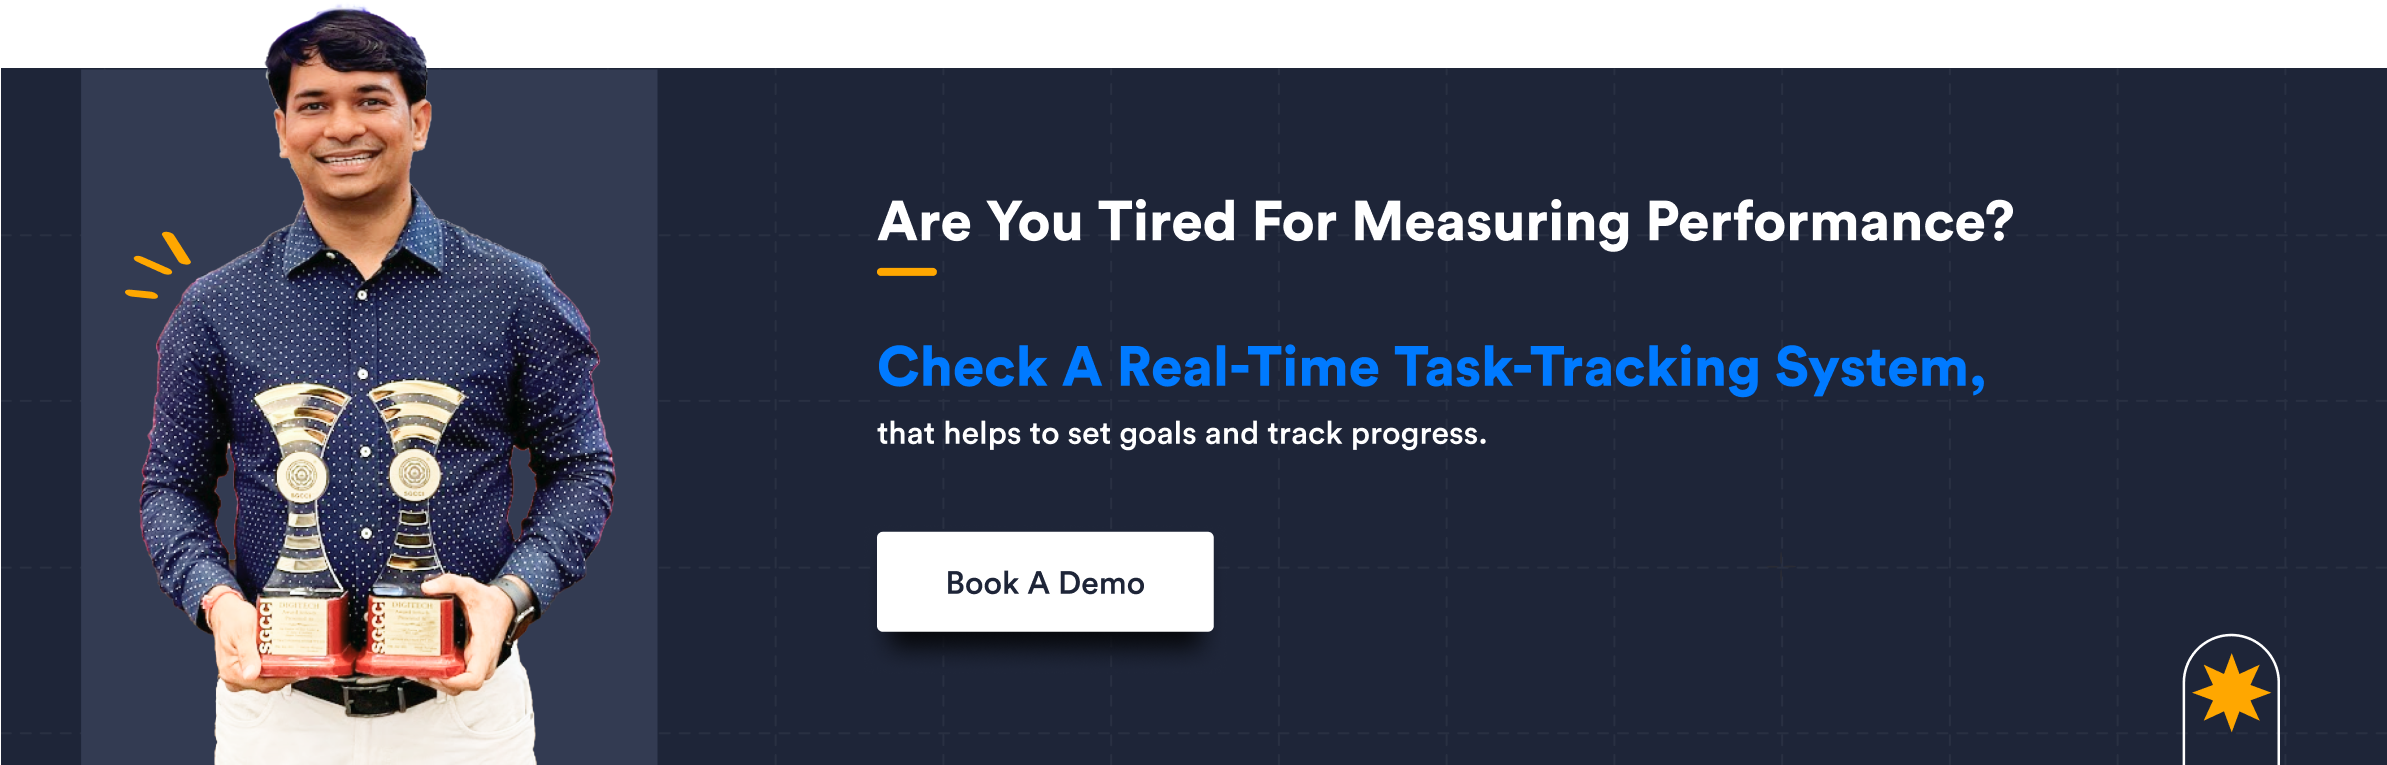 Are You Tired For Measuring